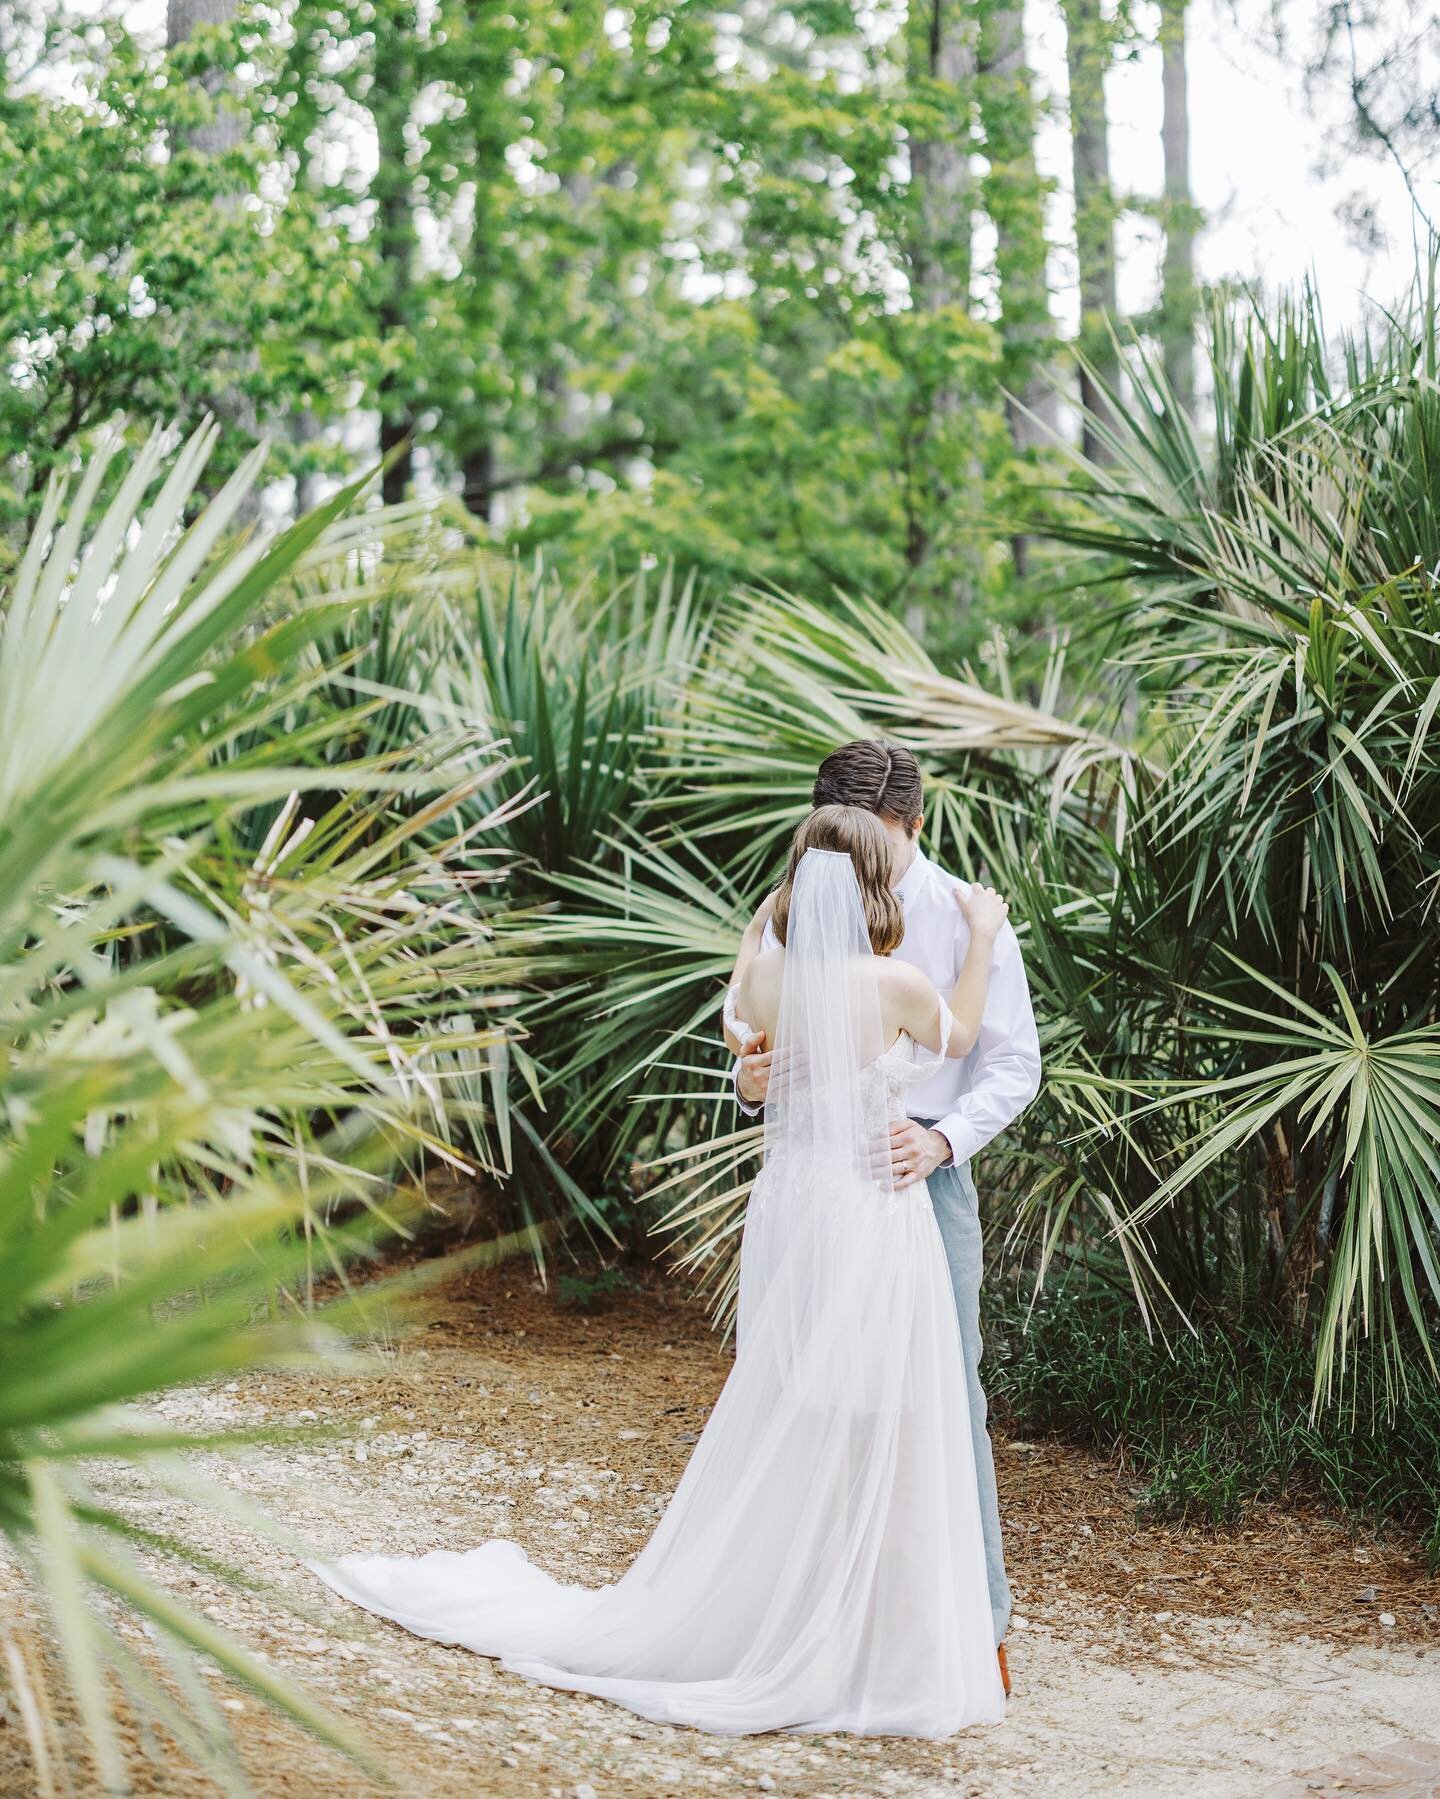 Kaitlyn + Ben were nothing short of adorable. They married in a garden with every moment feeling potently authentic. I remember this day was especially hot for me, I&rsquo;m in the mountains so I&rsquo;ve become less accustomed to heat. But the cloud